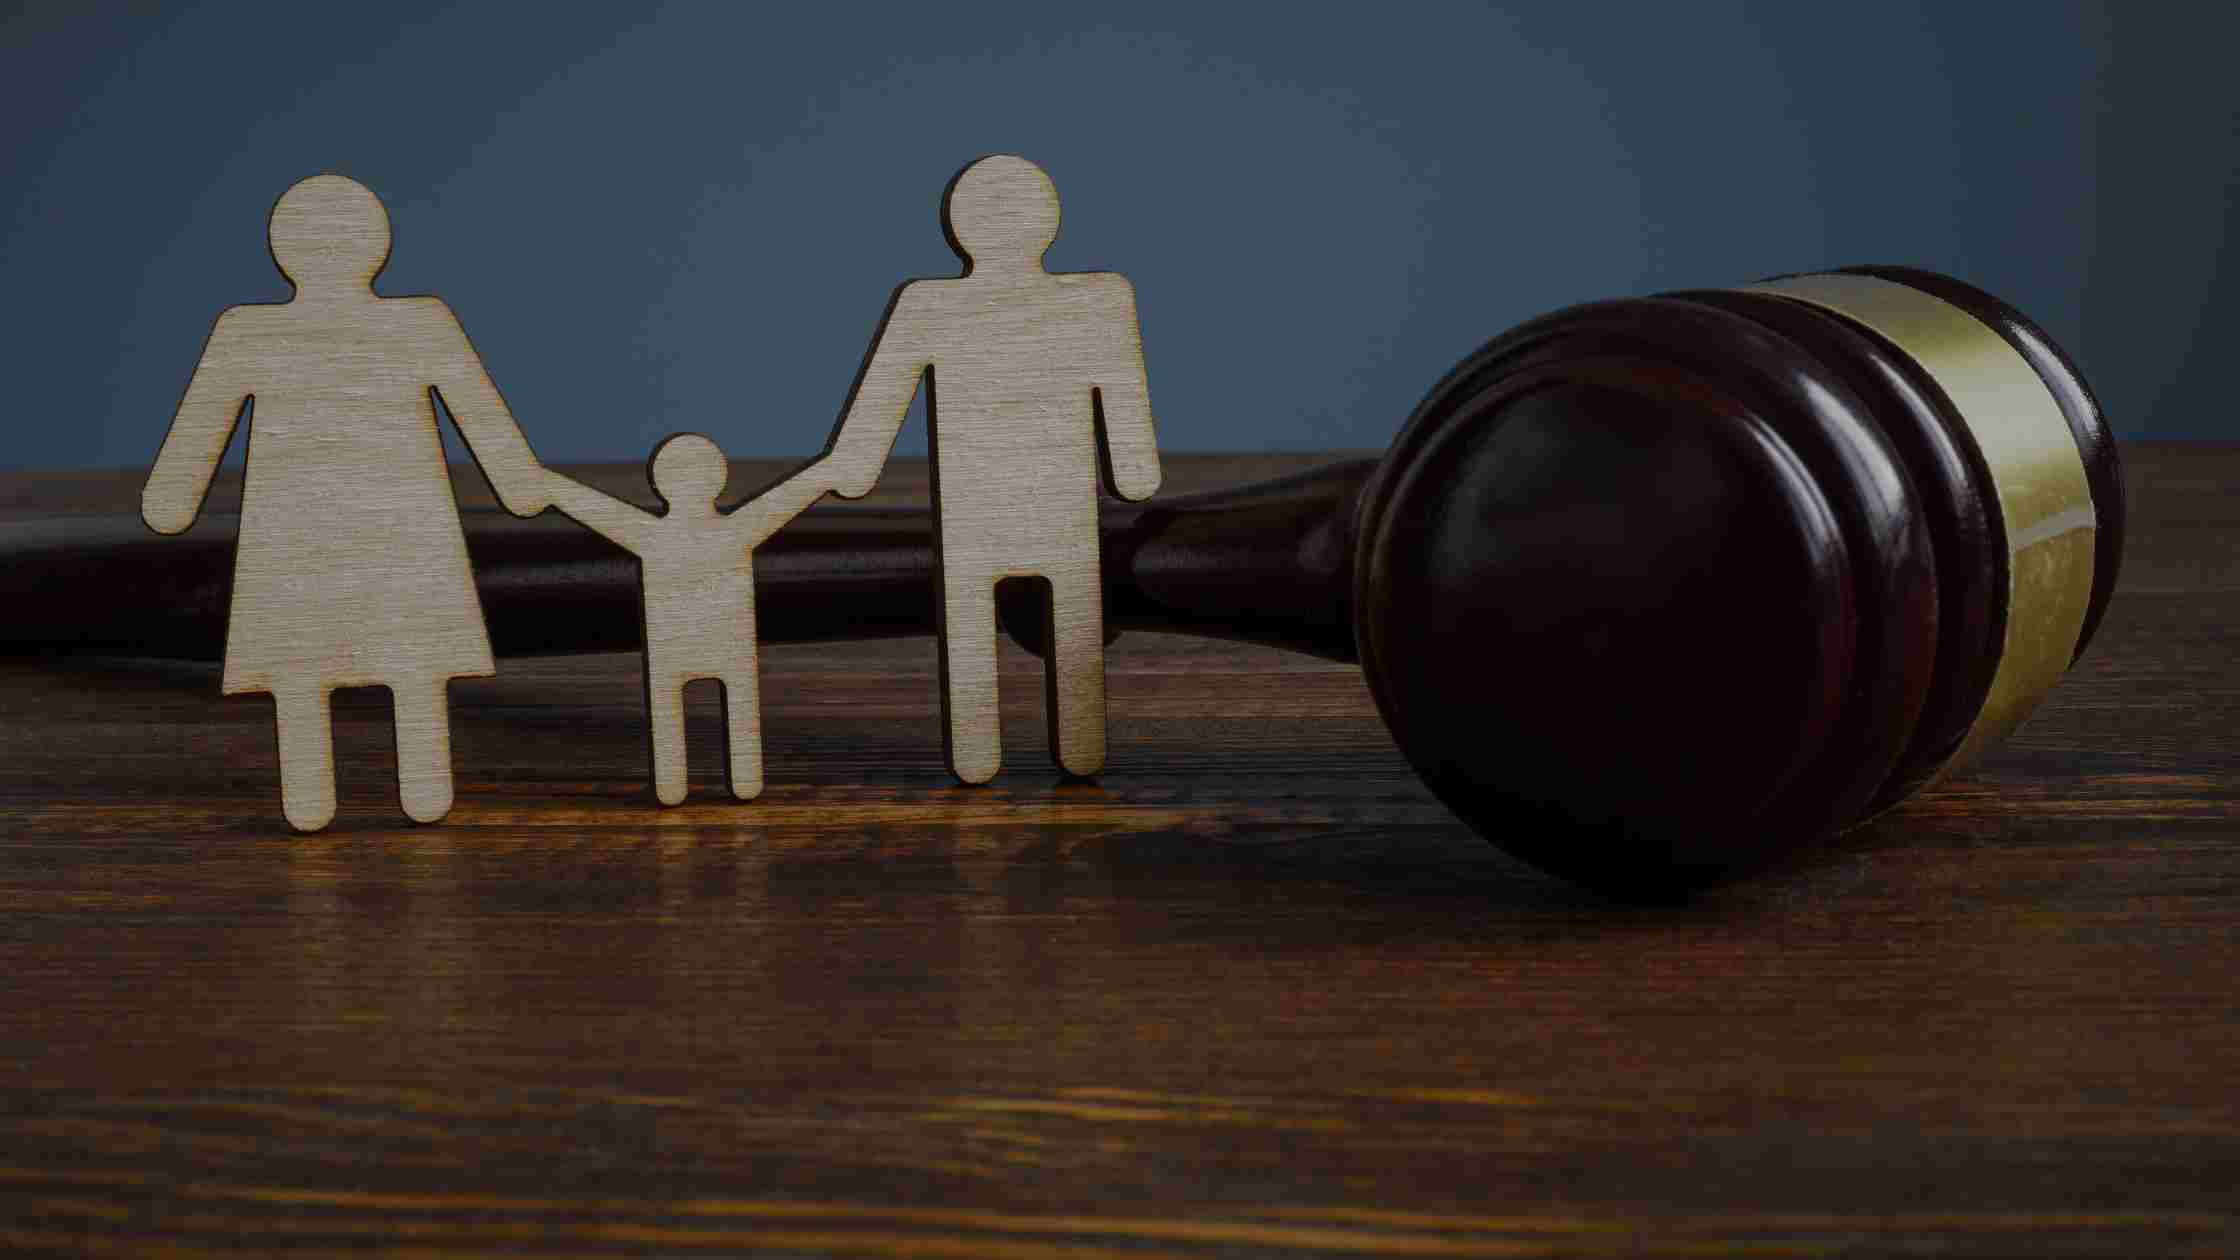 Shows three wooden figures of a family of three next to a gavel on a wooden surface to represent family law.